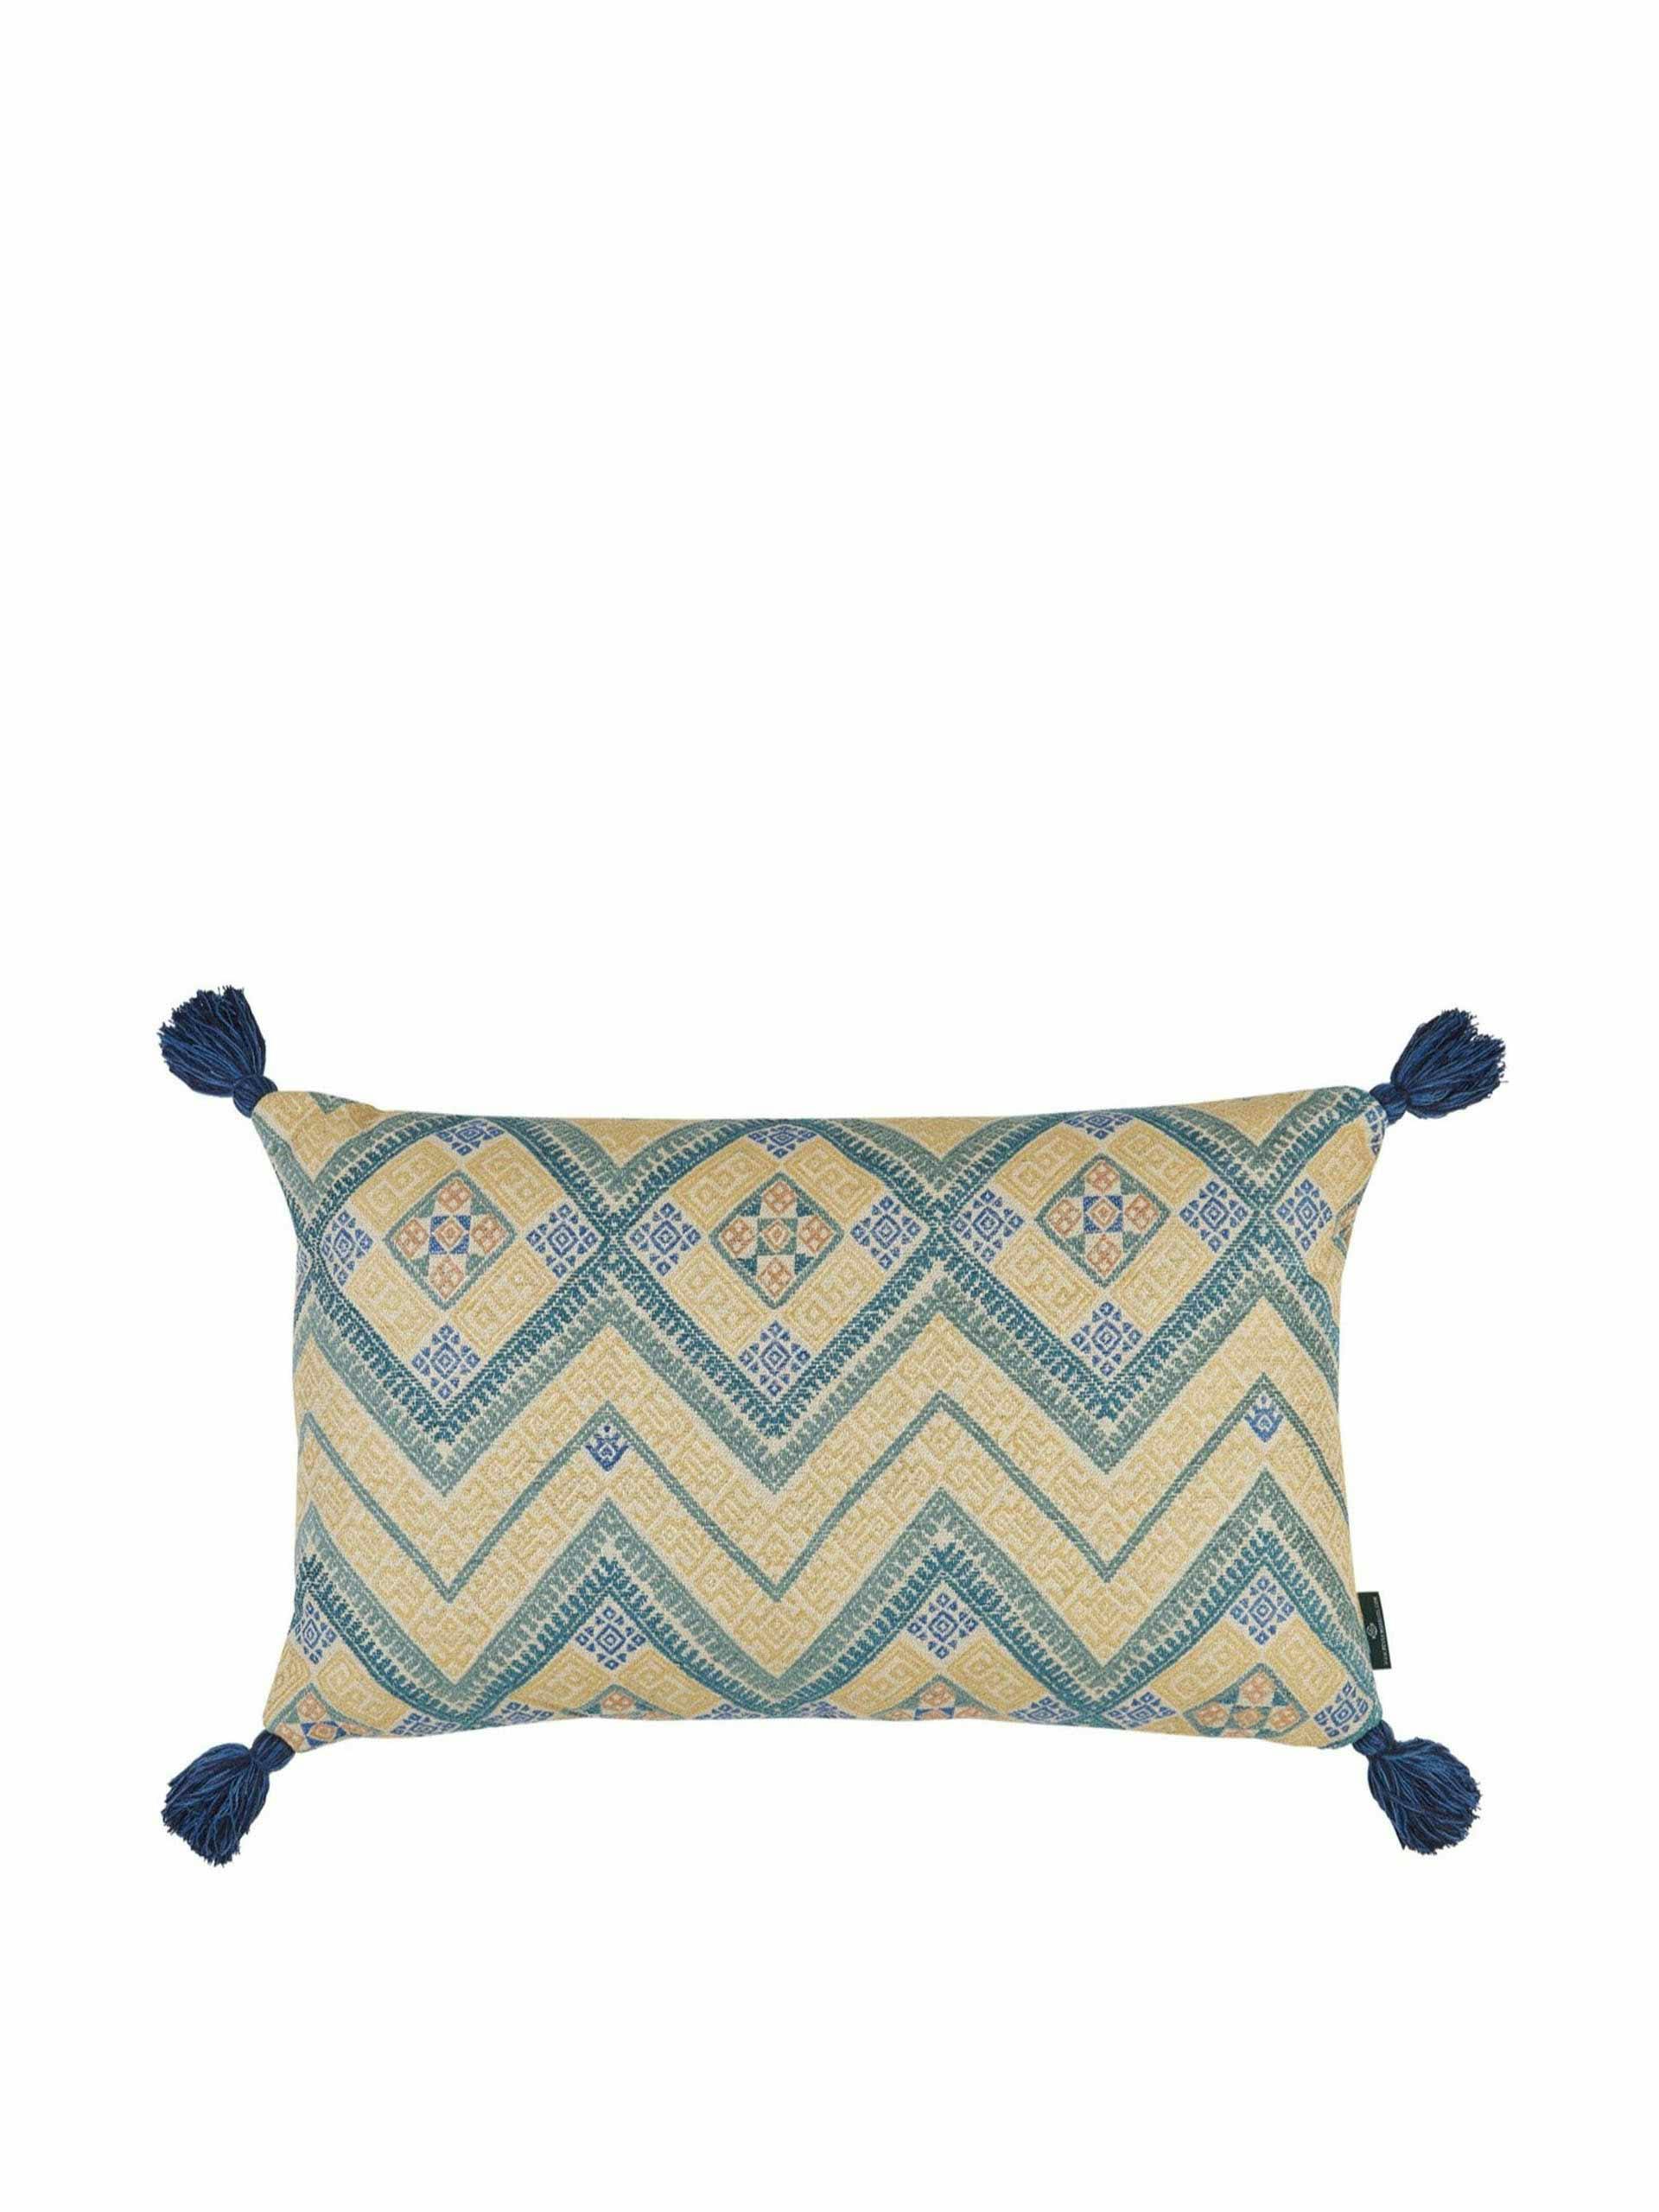 Limited edition gold blue yellow mosaic with mustard striped cushion with blue tassels